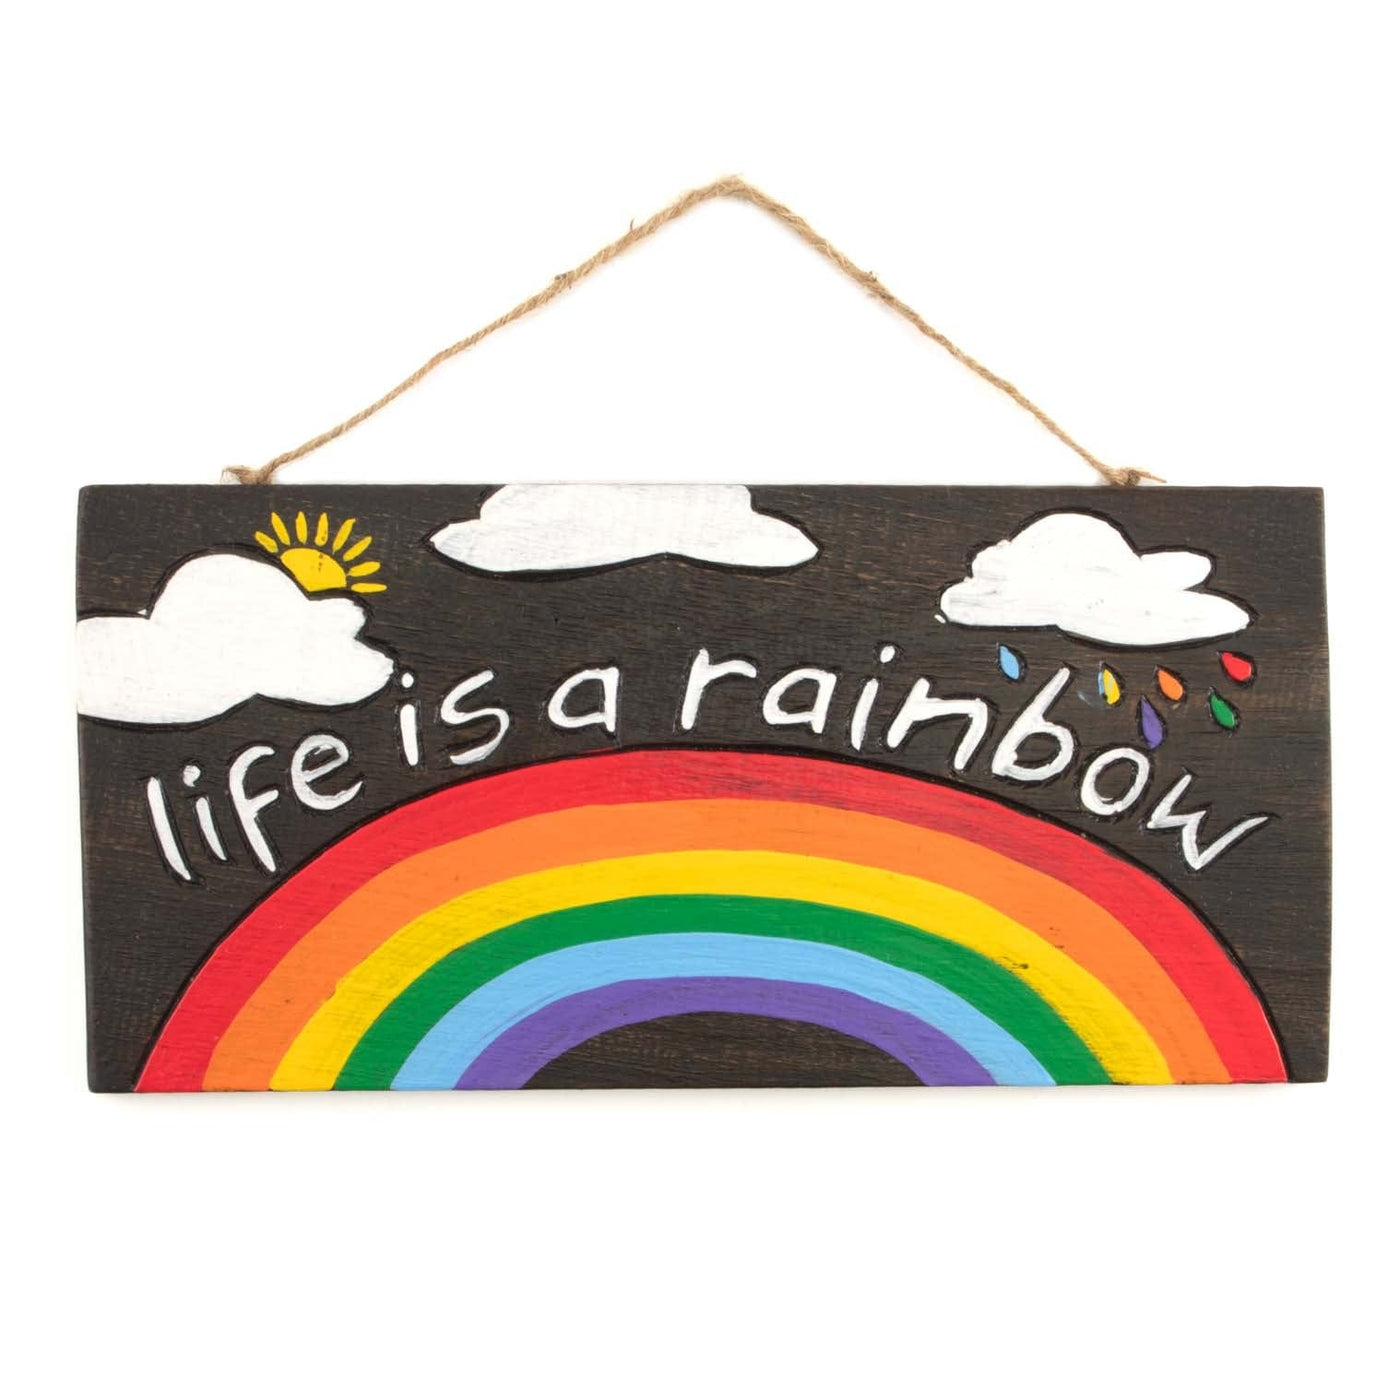 'Life is a rainbow' hanging plaque